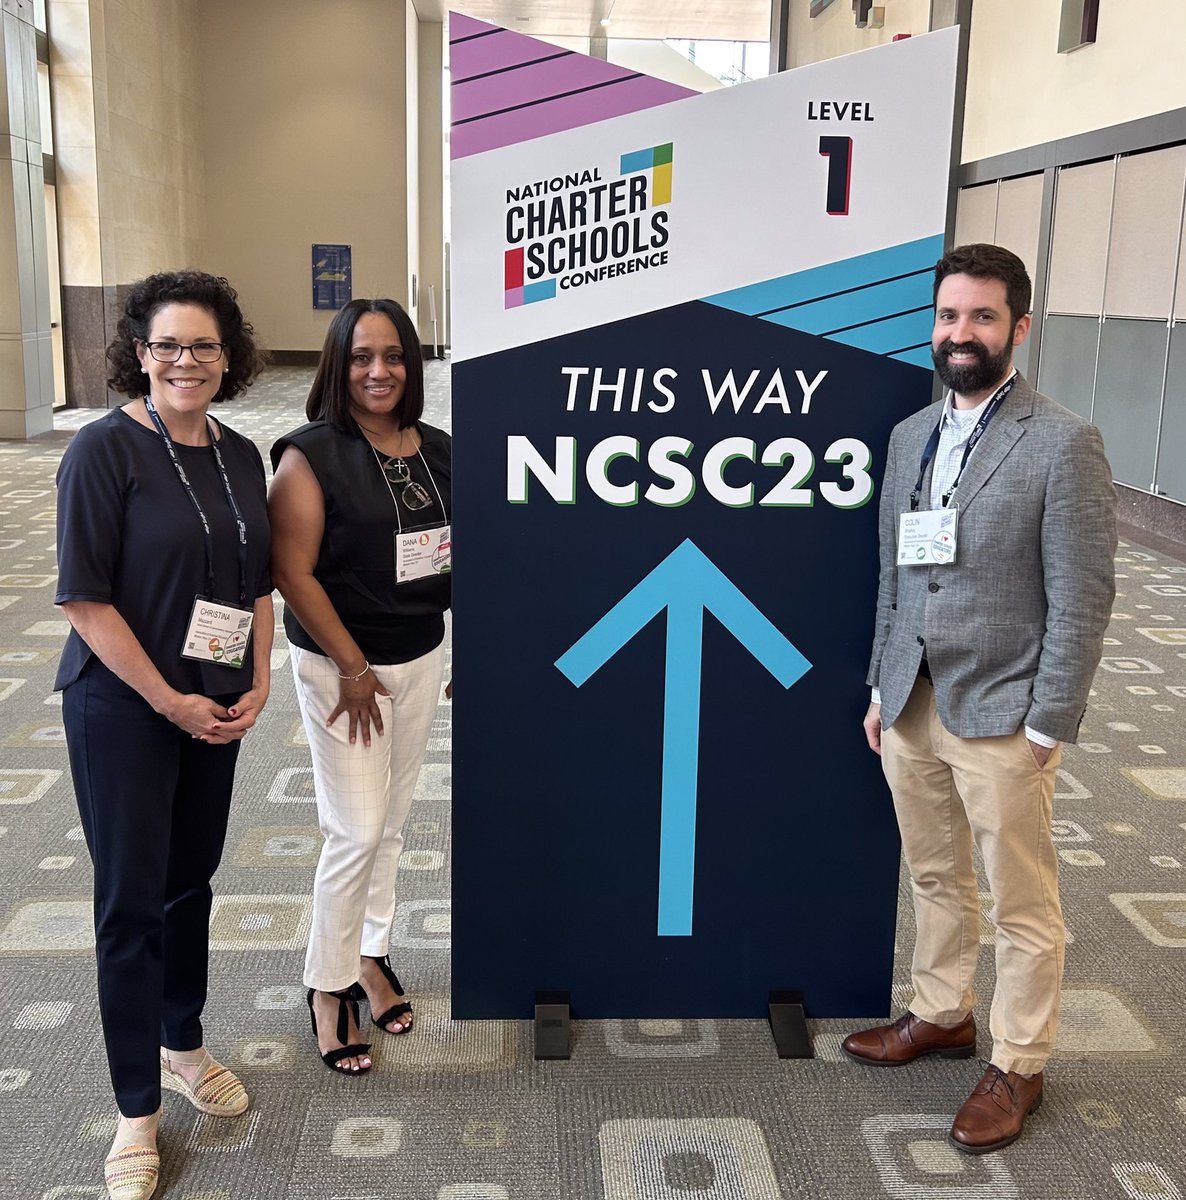 Enjoyed attending & connecting with charter school advocates across the states at the #NCSC23! @AAEteachers